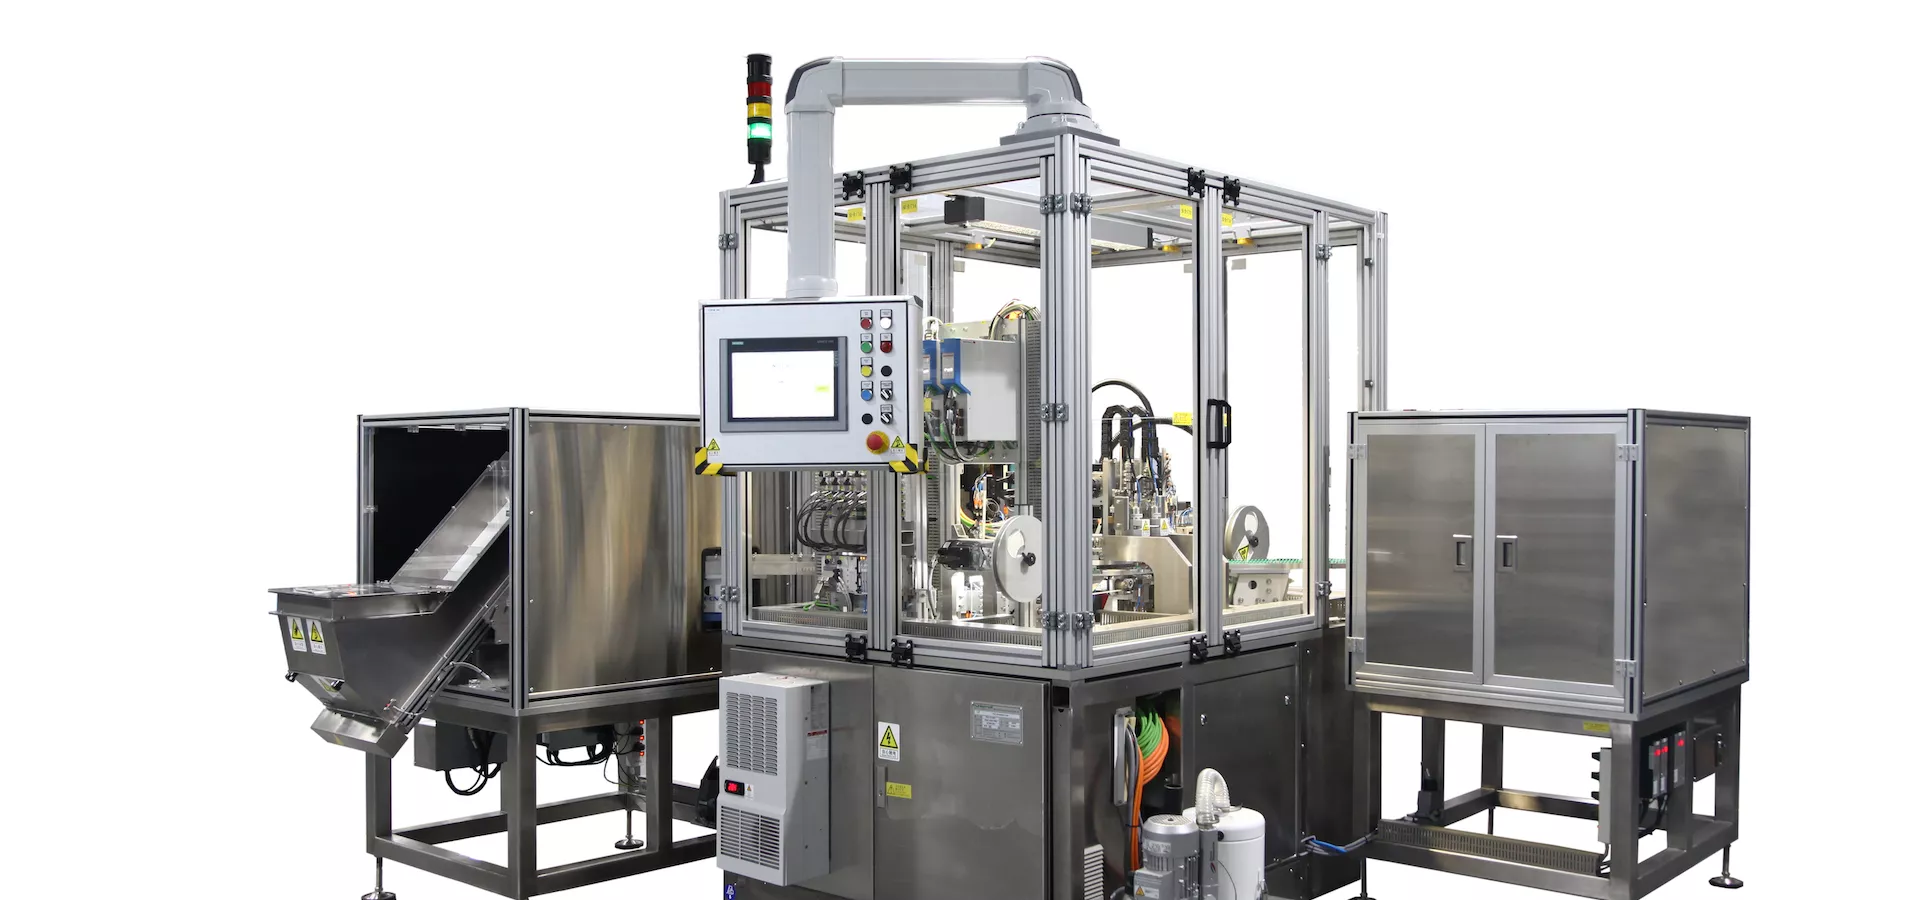 Automatic manufacturing of medical products